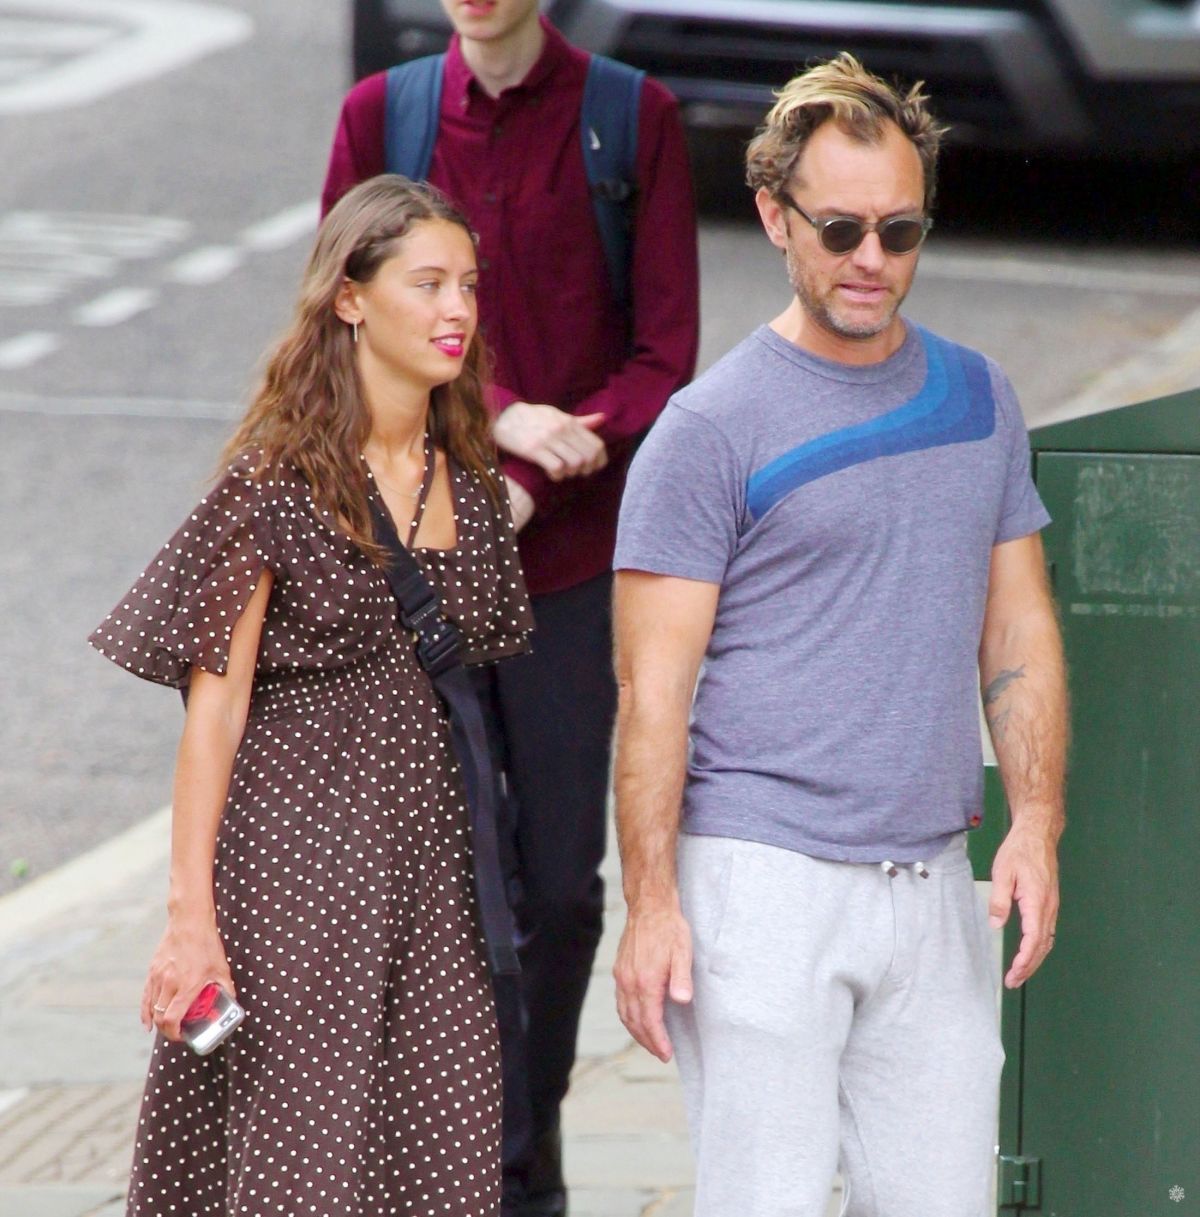 iris-and-jude-law-out-for-lunch-in-london-07-14-2019-7.jpg